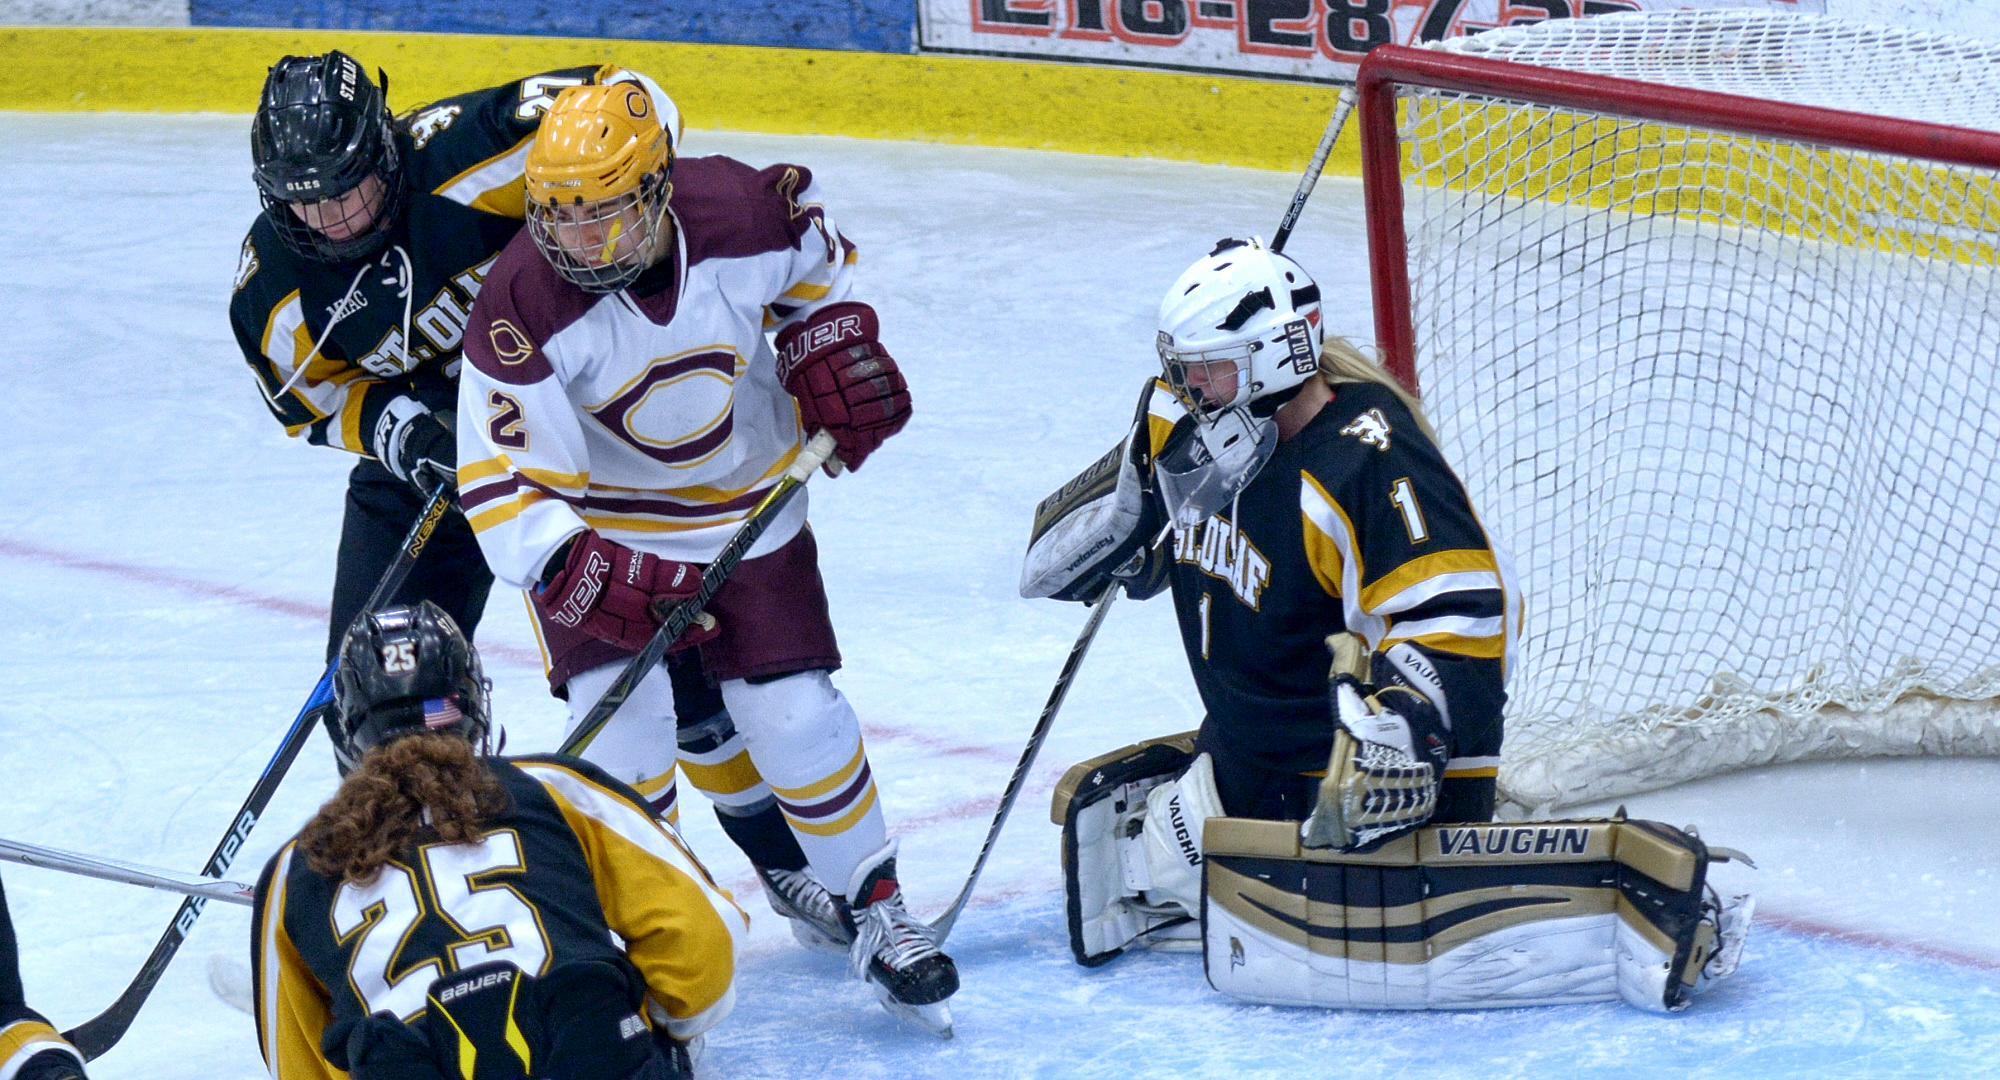 Junior Amanda Flemming scored the game-winning goal in the Cobbers' dramatic come-from-behind victory at St. Olaf.